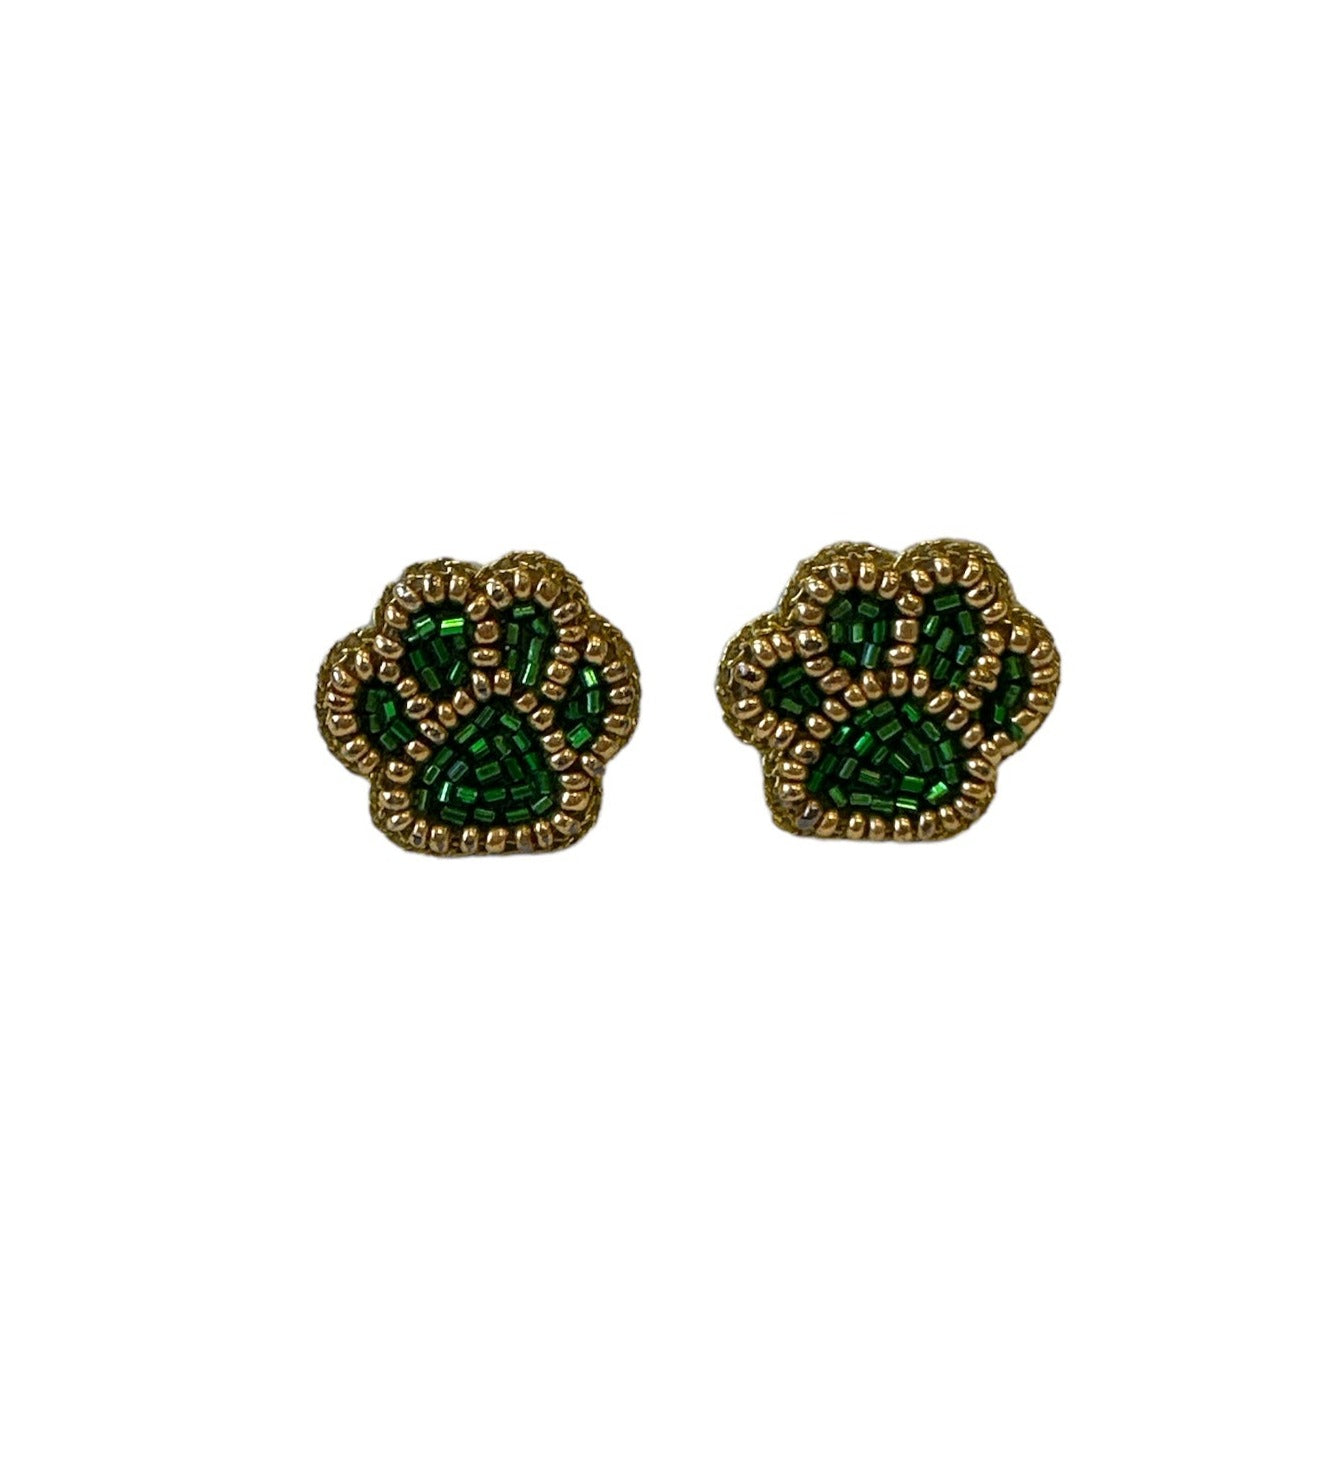 Tiger Paw Stud Earrings - Green and Gold